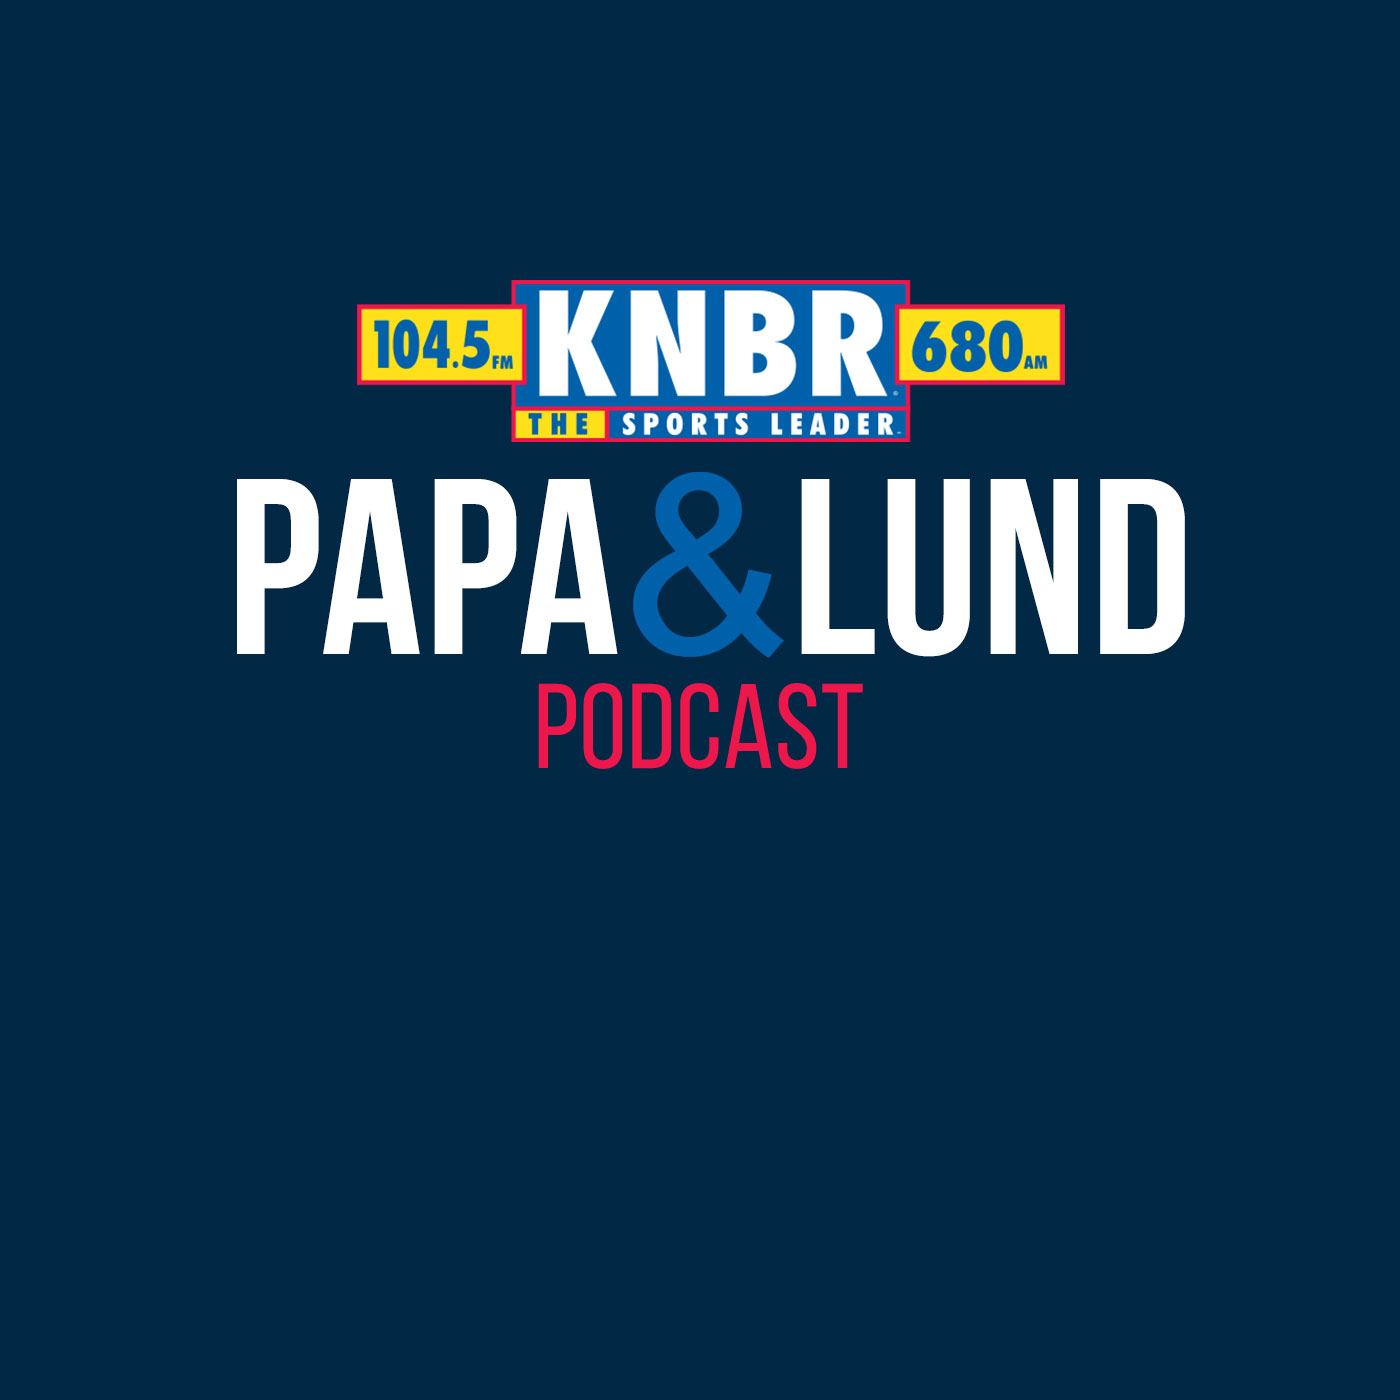 5-8 Papa & Lund FT Adam Copeland - Show Hour 2 - Papa discuss the what is needed for the Giants Offense and whether or not if the Giants offseason was a bust or are better days still to come for the Giants Offense + Interview with Hunter Pence